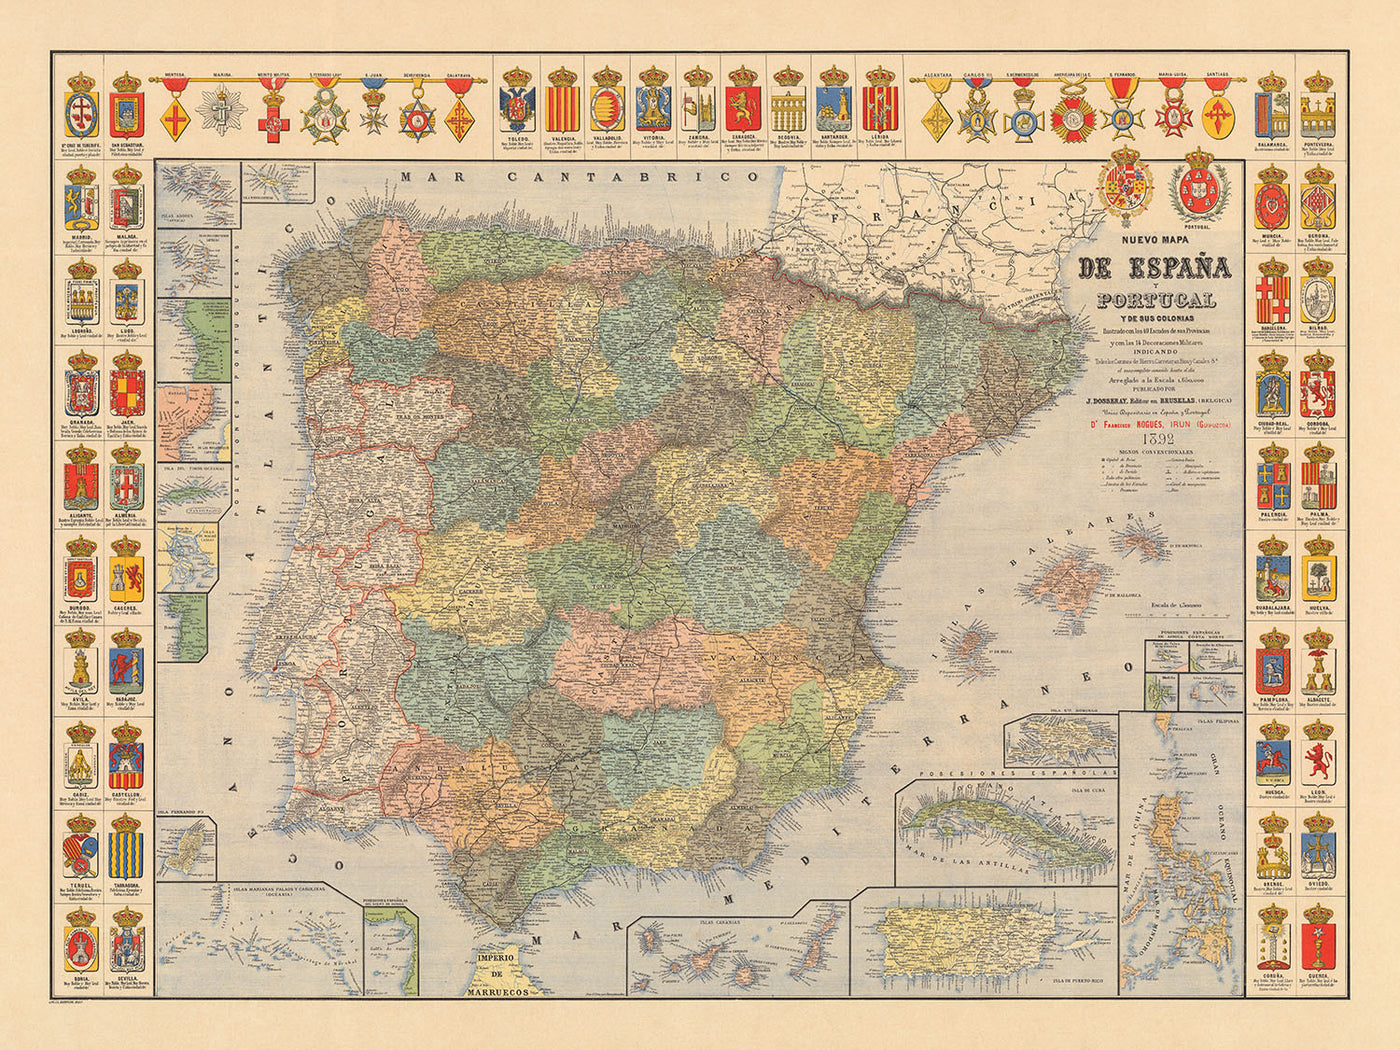 Old Map of Spain and Portugal by Dosseray, 1892: Empires, Colonies, Puerto Rico, Philippines, Cuba